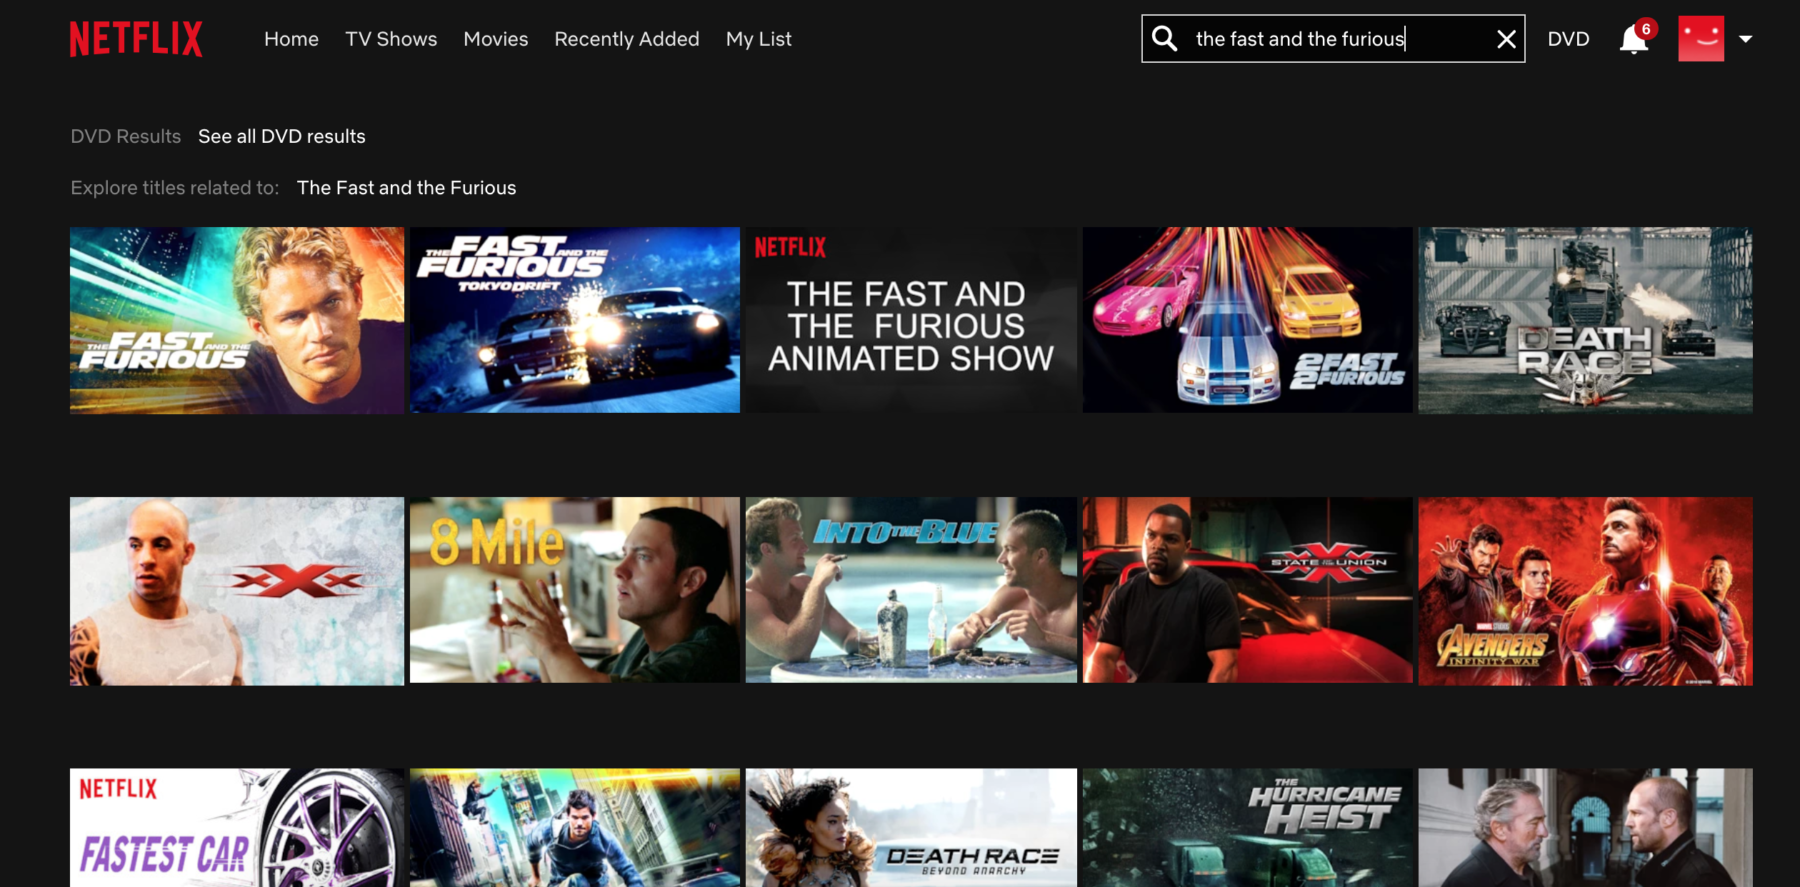 The Fast and the Furious animated show on Netflix